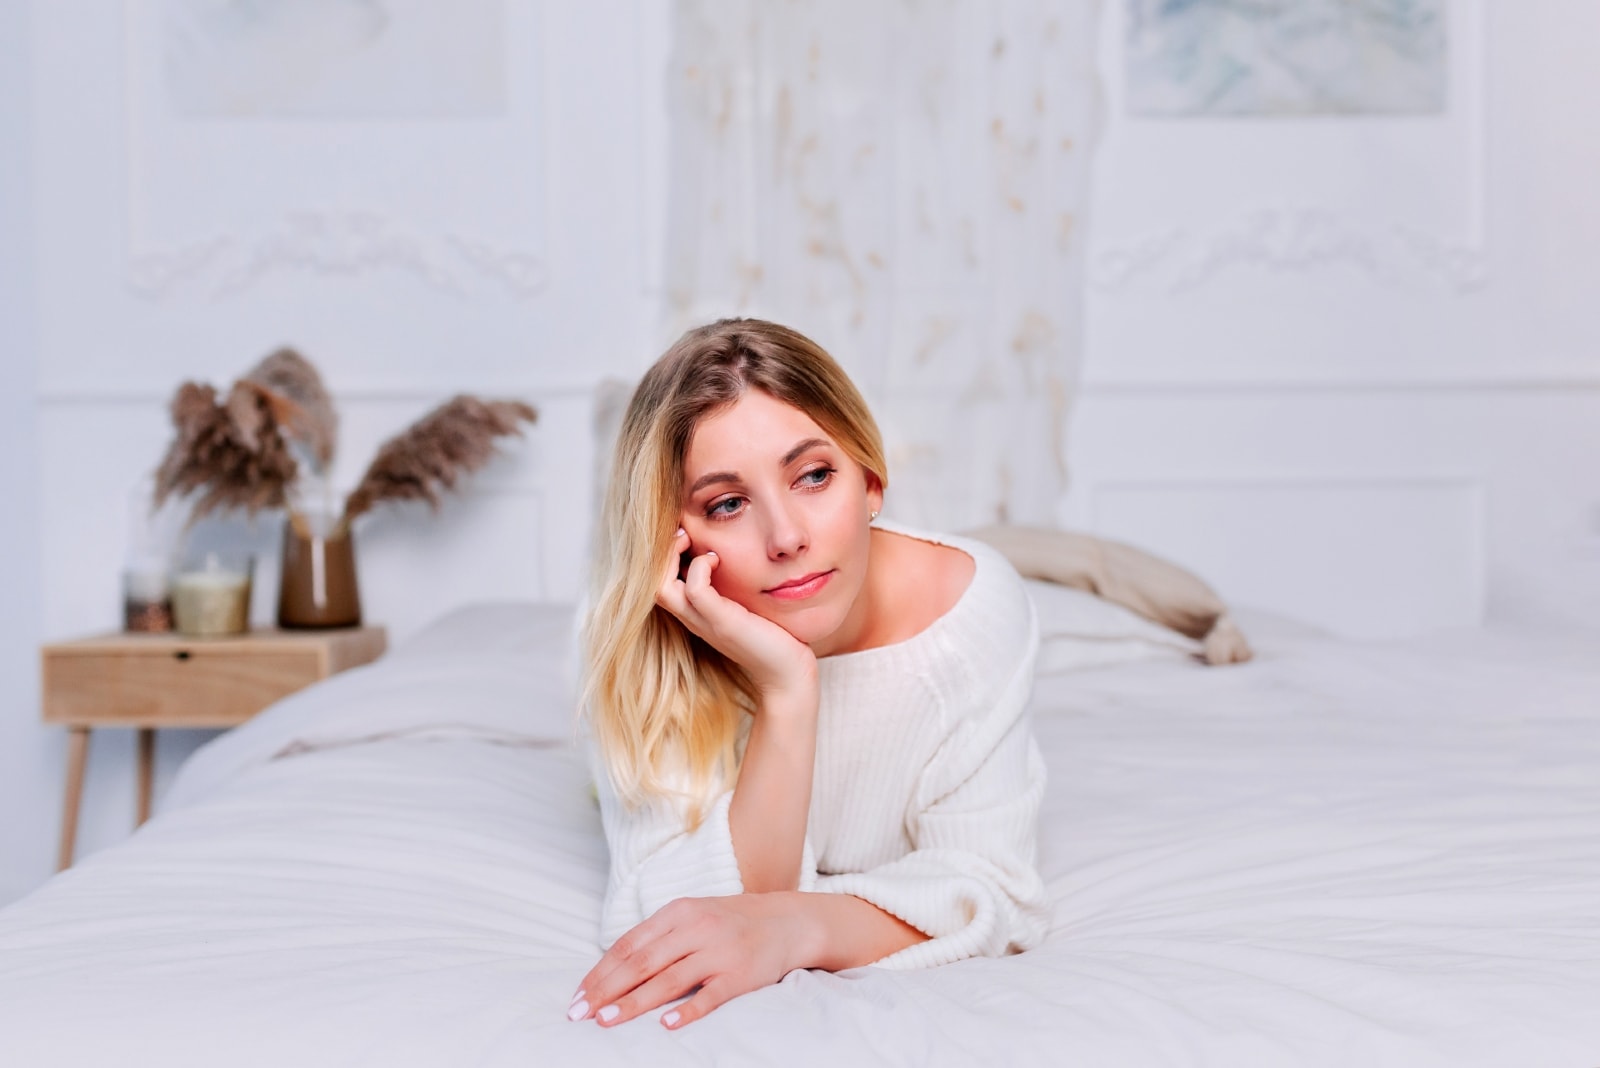 sad woman in white top laying on bed